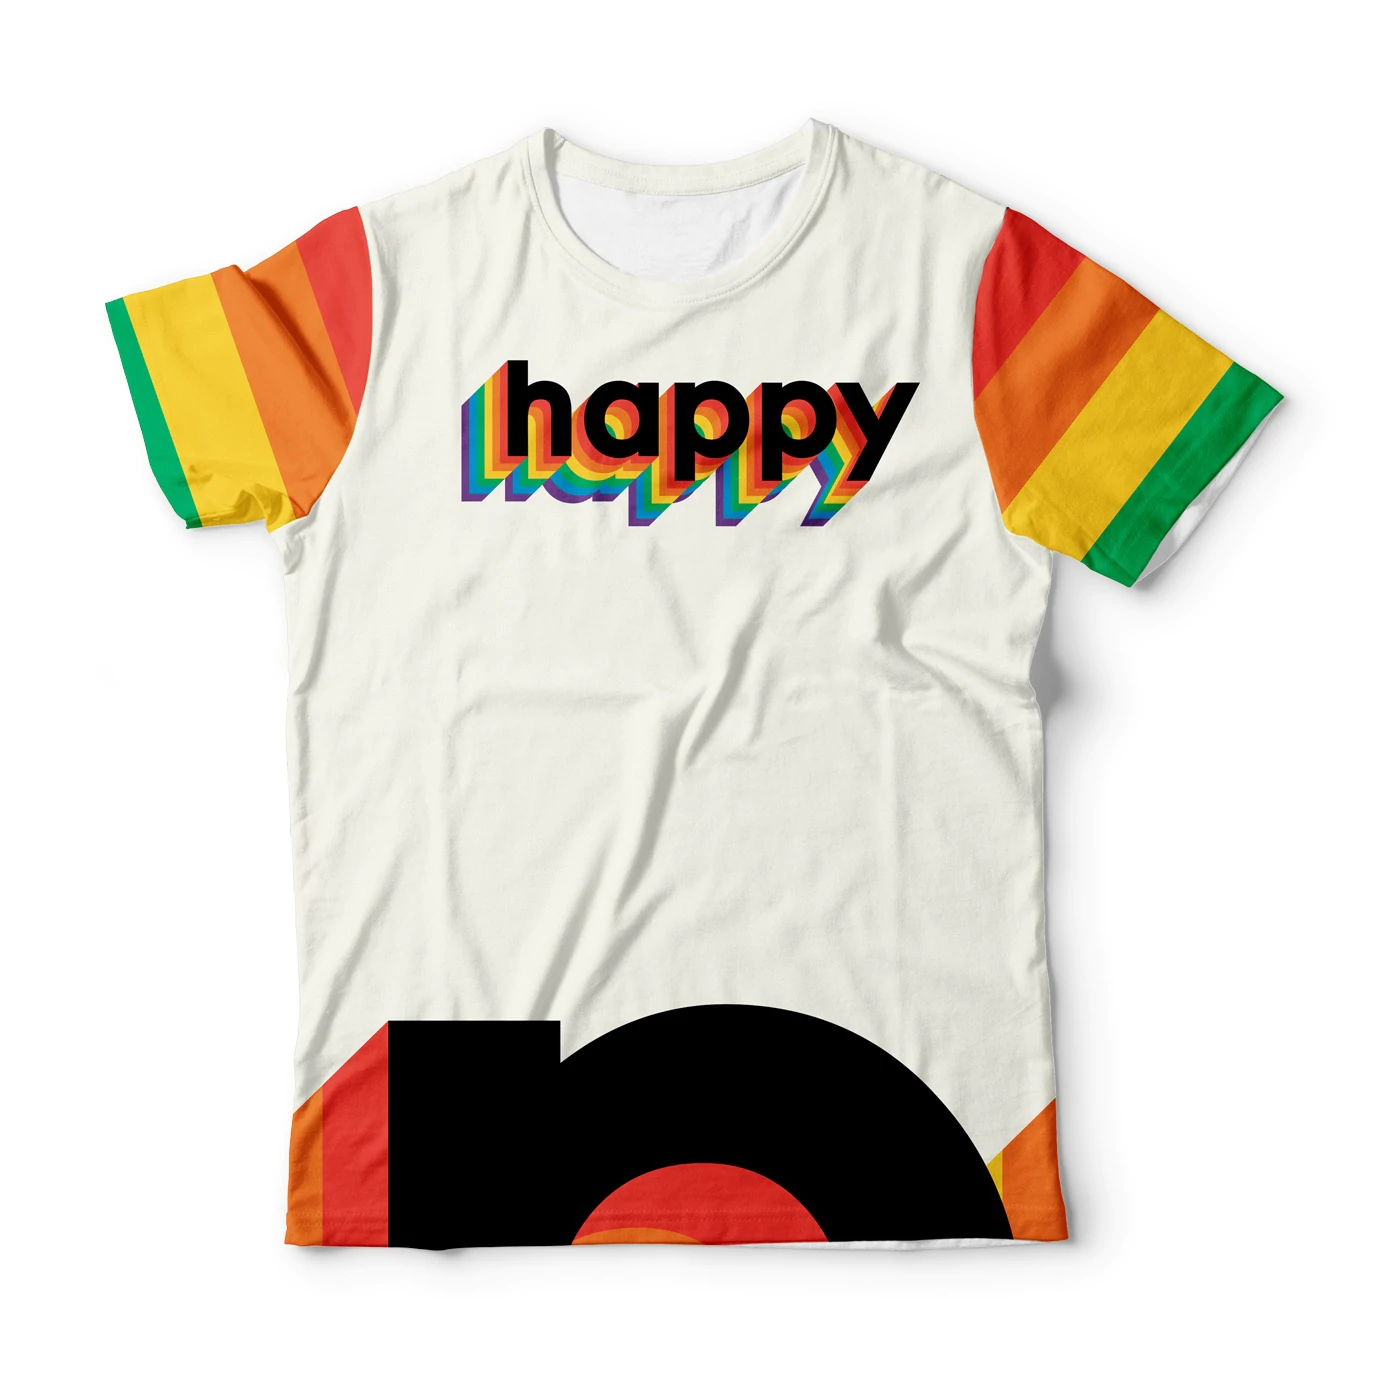 Happy Pride 3D T Shirt For Gaymer/ Lesbian Happy 3D Shirts/ Rainbow Colors Shirt For Lgbt